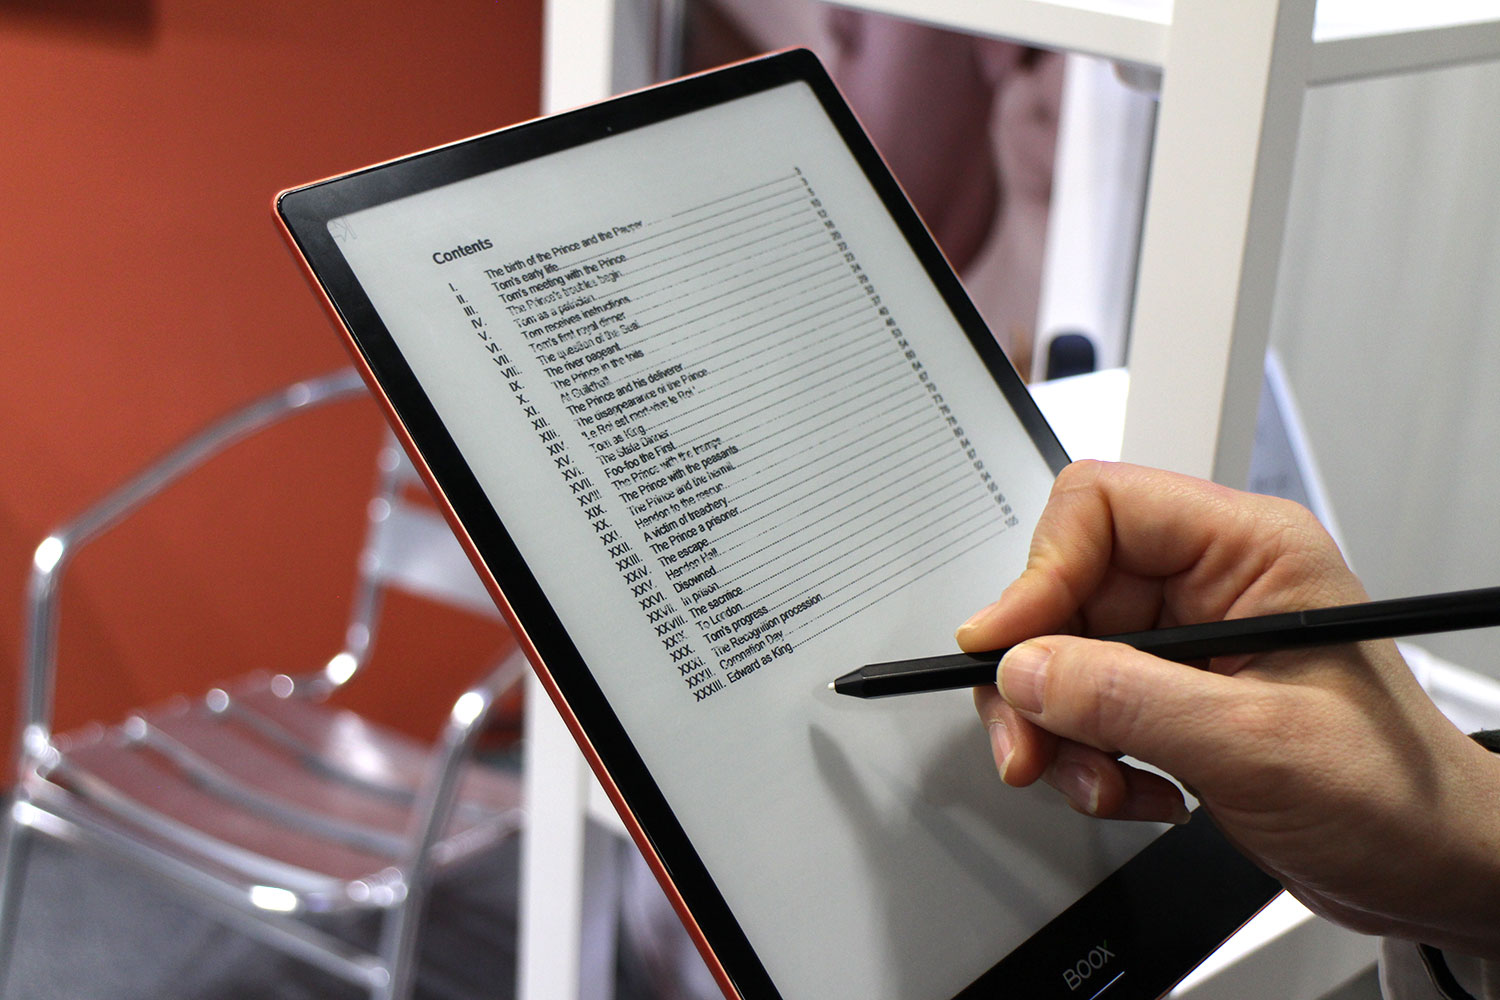 Boox Max 2 and Boox Note Pro Ebook Readers Hands-on Review